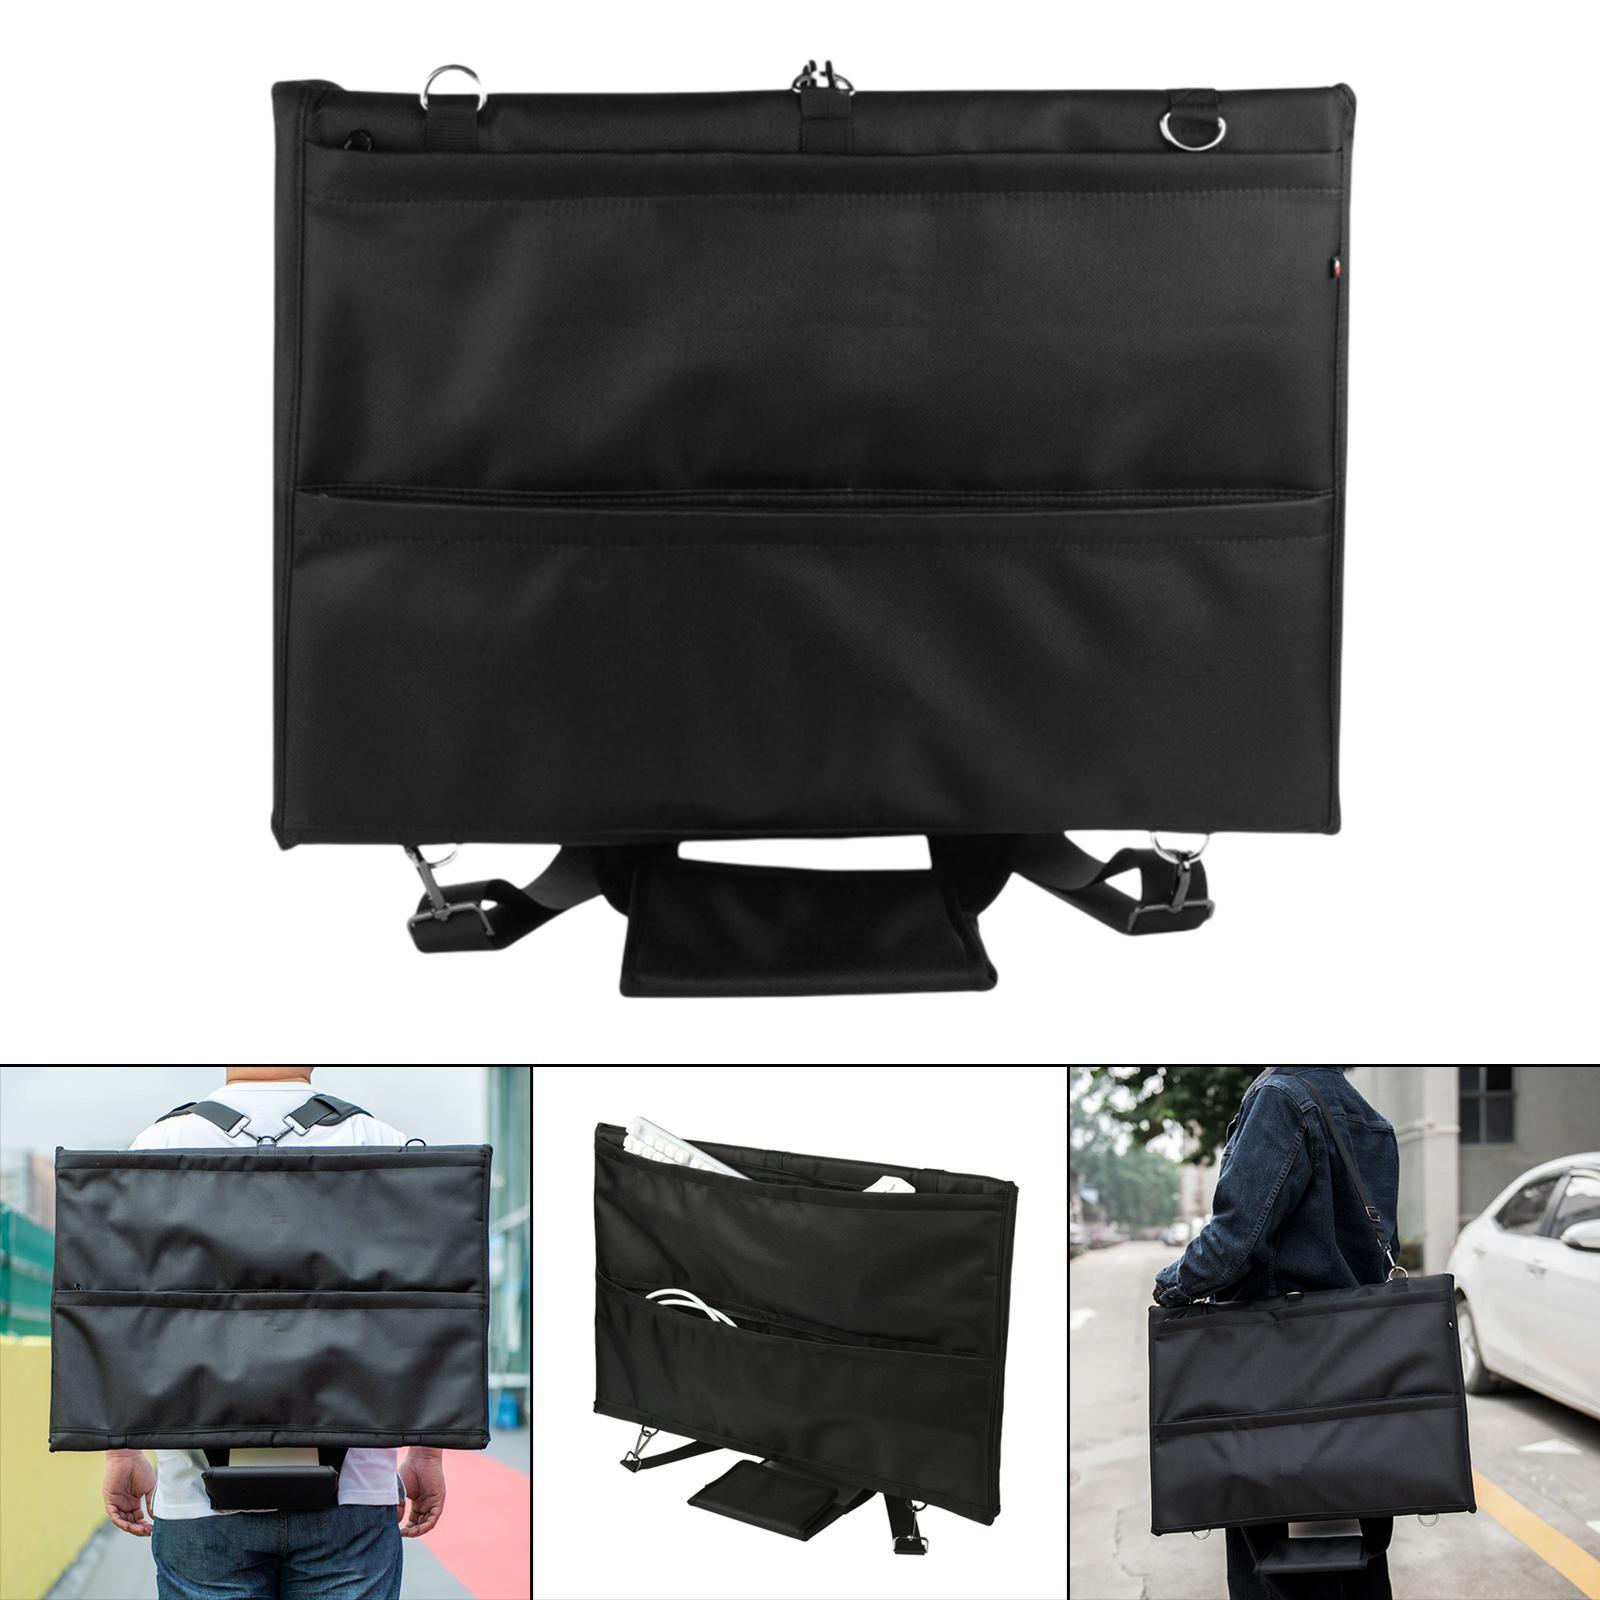 Travel Carrying Bag for iMac Desktop Computer Protective Storage Case Monitor for iMac Screen and Accessories